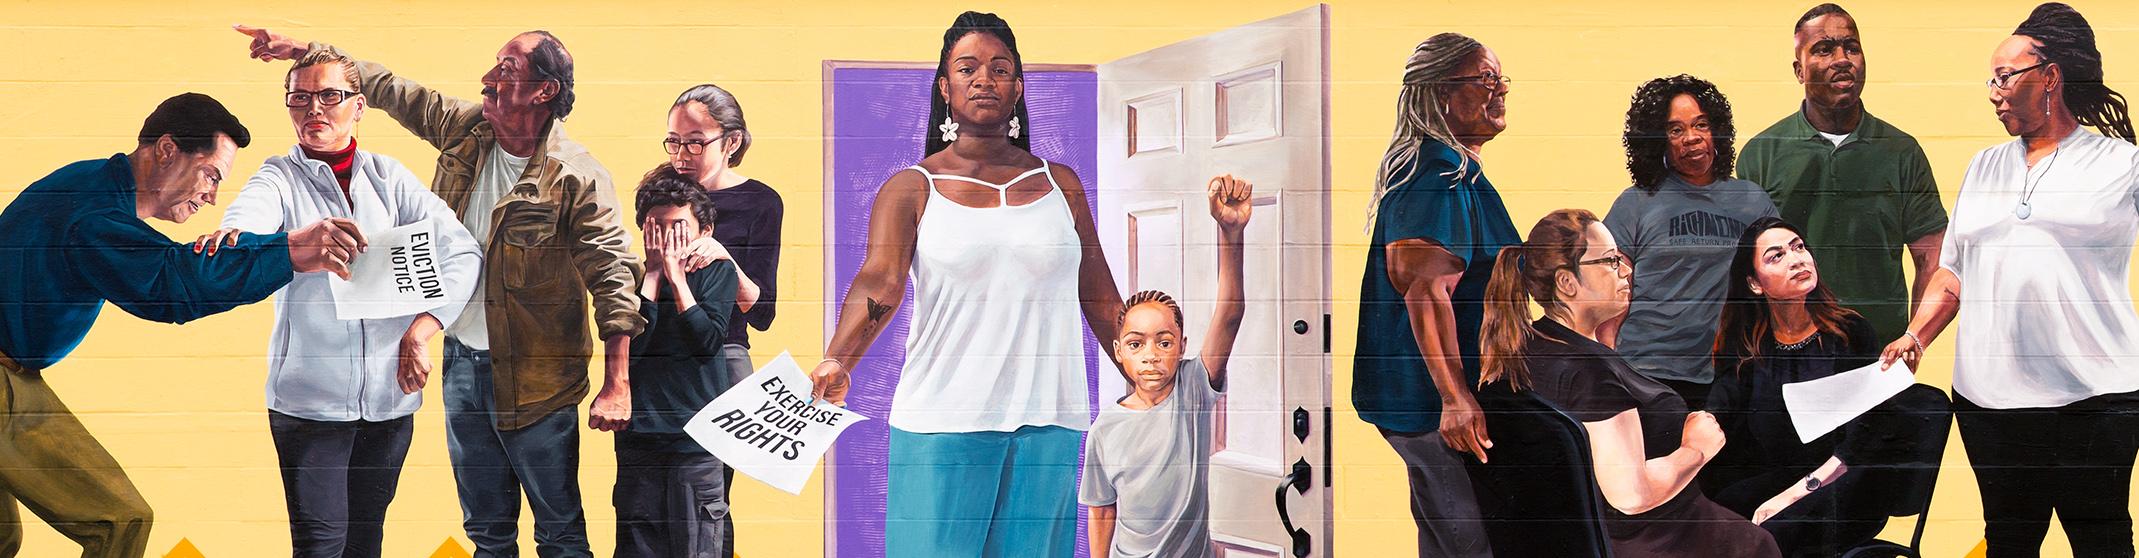 A public art mural painted in Richmond, California. The visible portion of the mural shows a Black mother and her child; she extends her hand to show a poster reading "Exercise your rights" while the child raises their fist. To the right of them, a Black woman speaks to a mixed race and gender group who listen intently. To the left is a family resisting eviction; a small child holds their hand to their face crying while the elder family members push away a landlord commandingly.